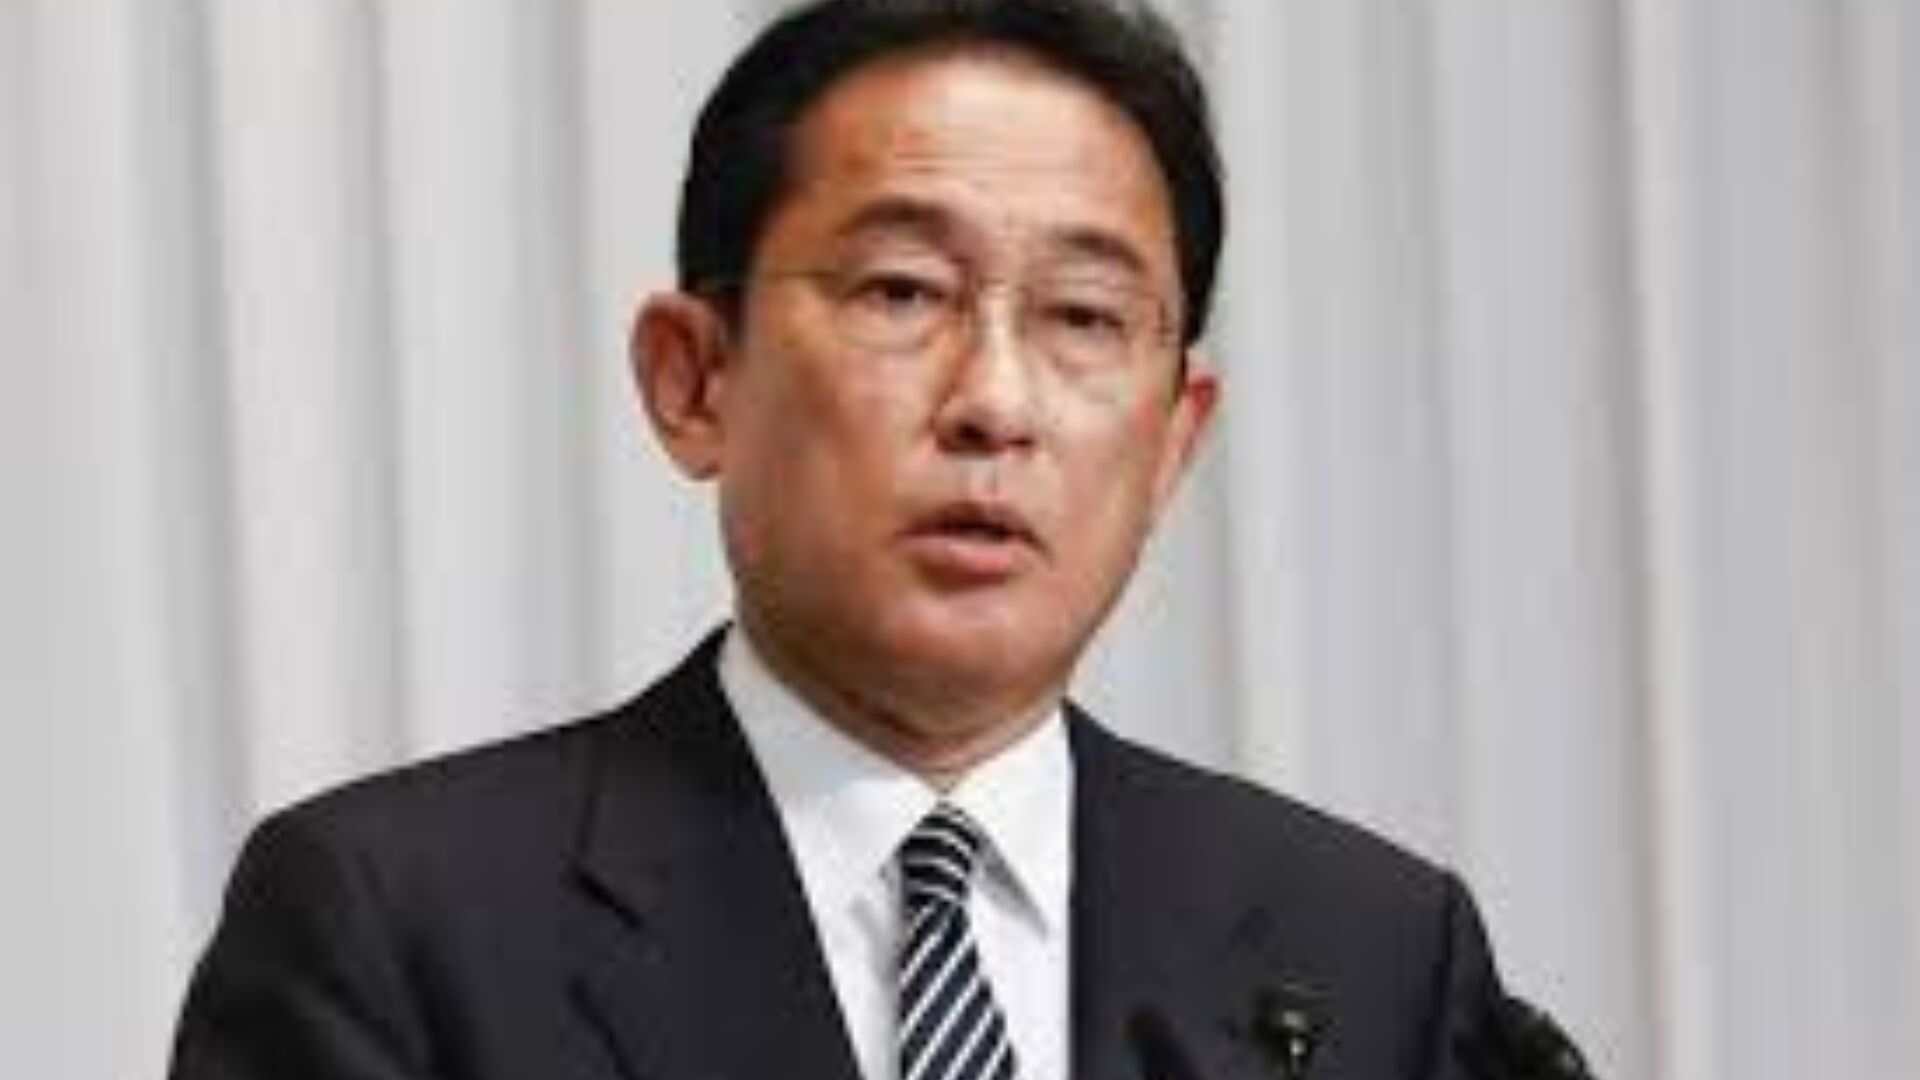 Japan PM Kishida Faces Setback As Ruling Party Loses 3 Parliamentary Seats In Key Election